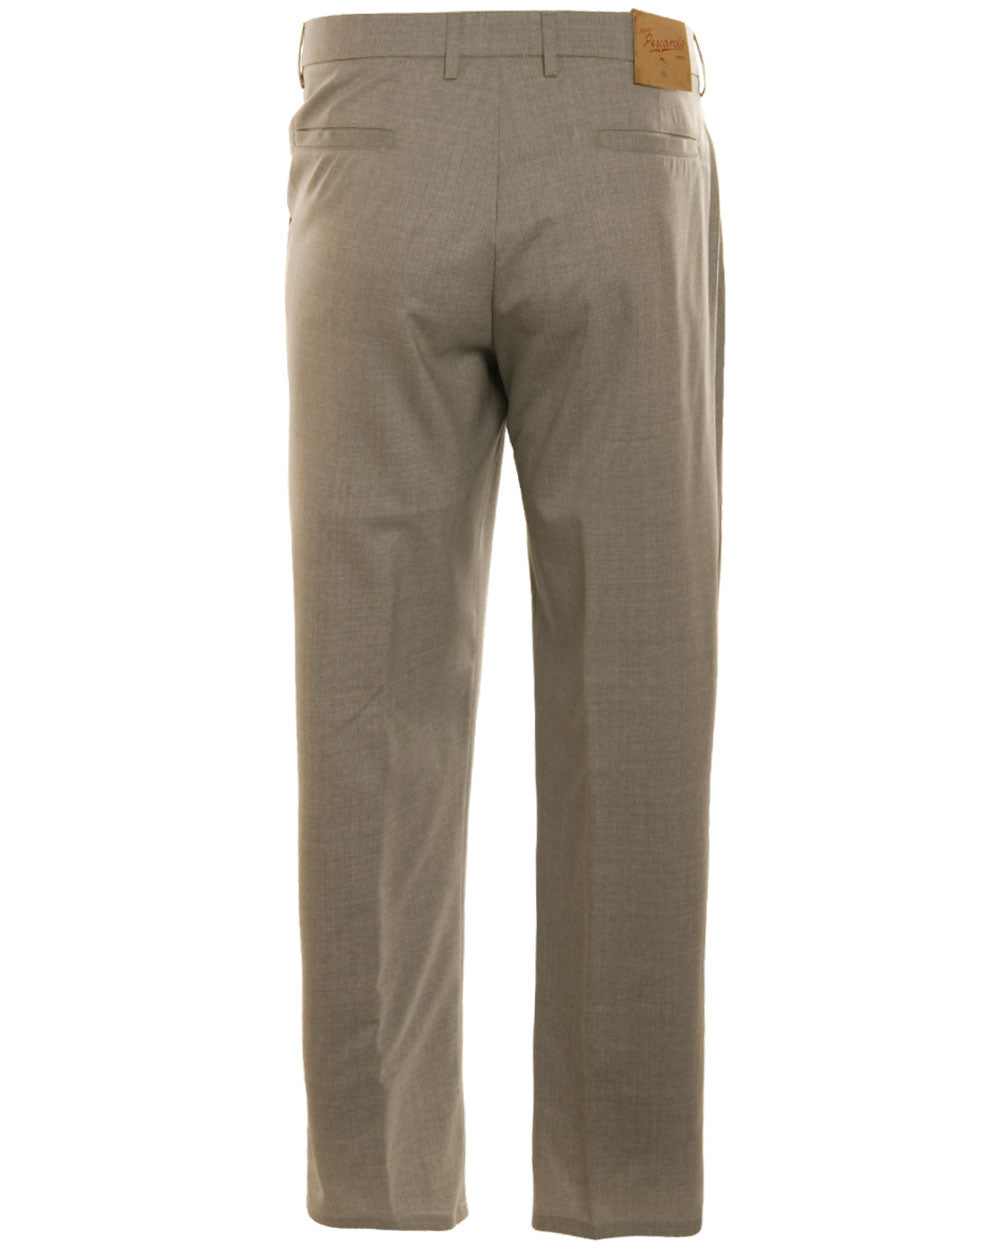 Natural Stretch Flat Front Pant in Silver